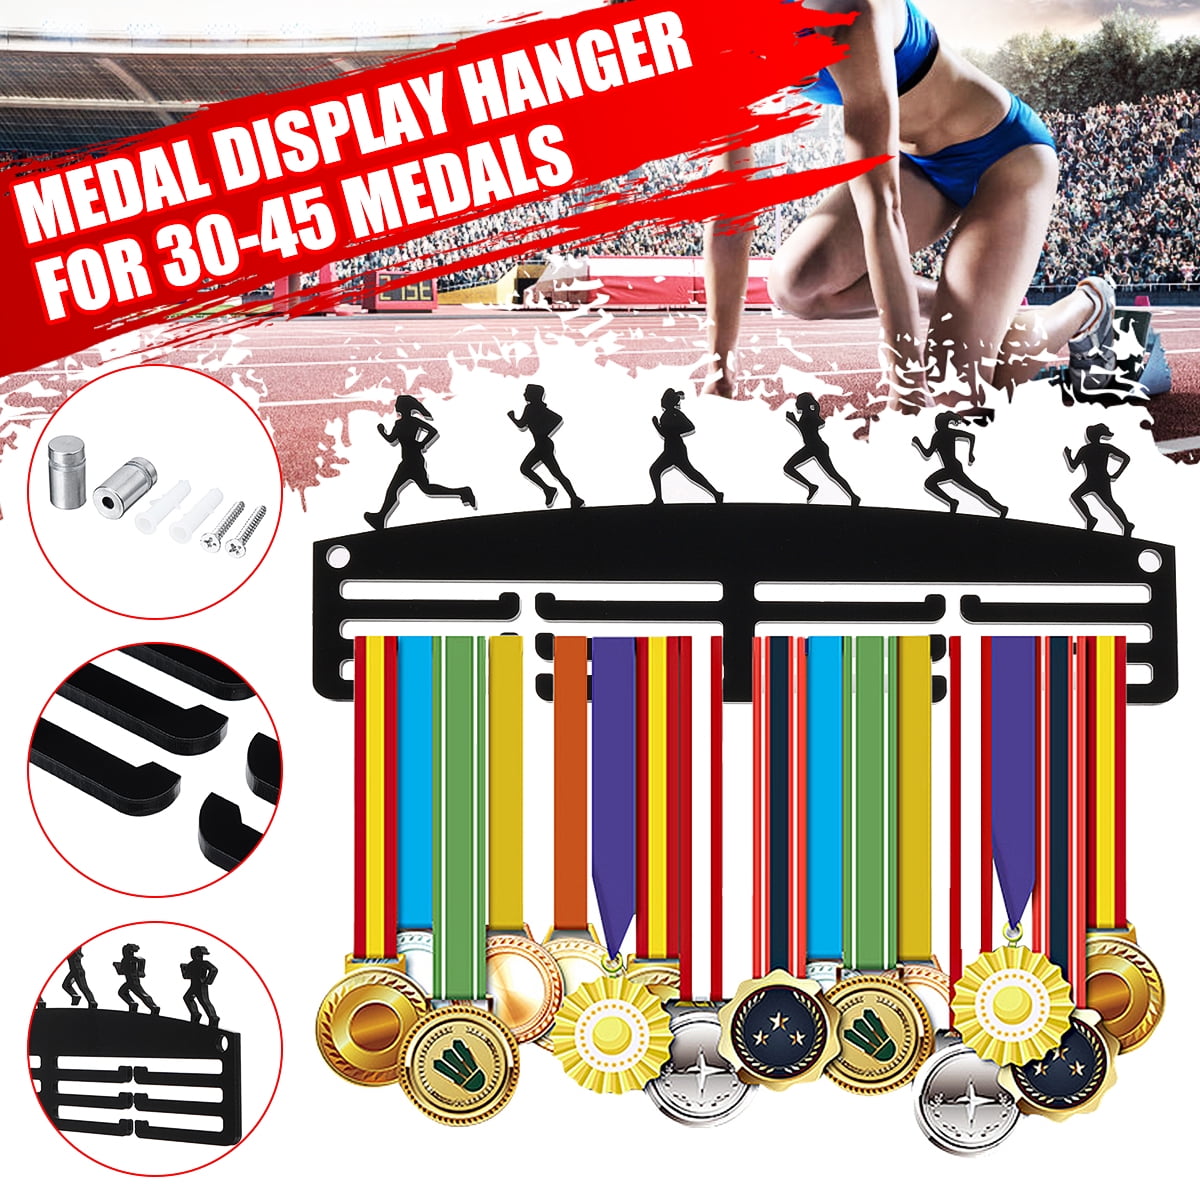 Medal Display Hanger Holder RUNNING Black Acrylic with fixings & FREE POST 